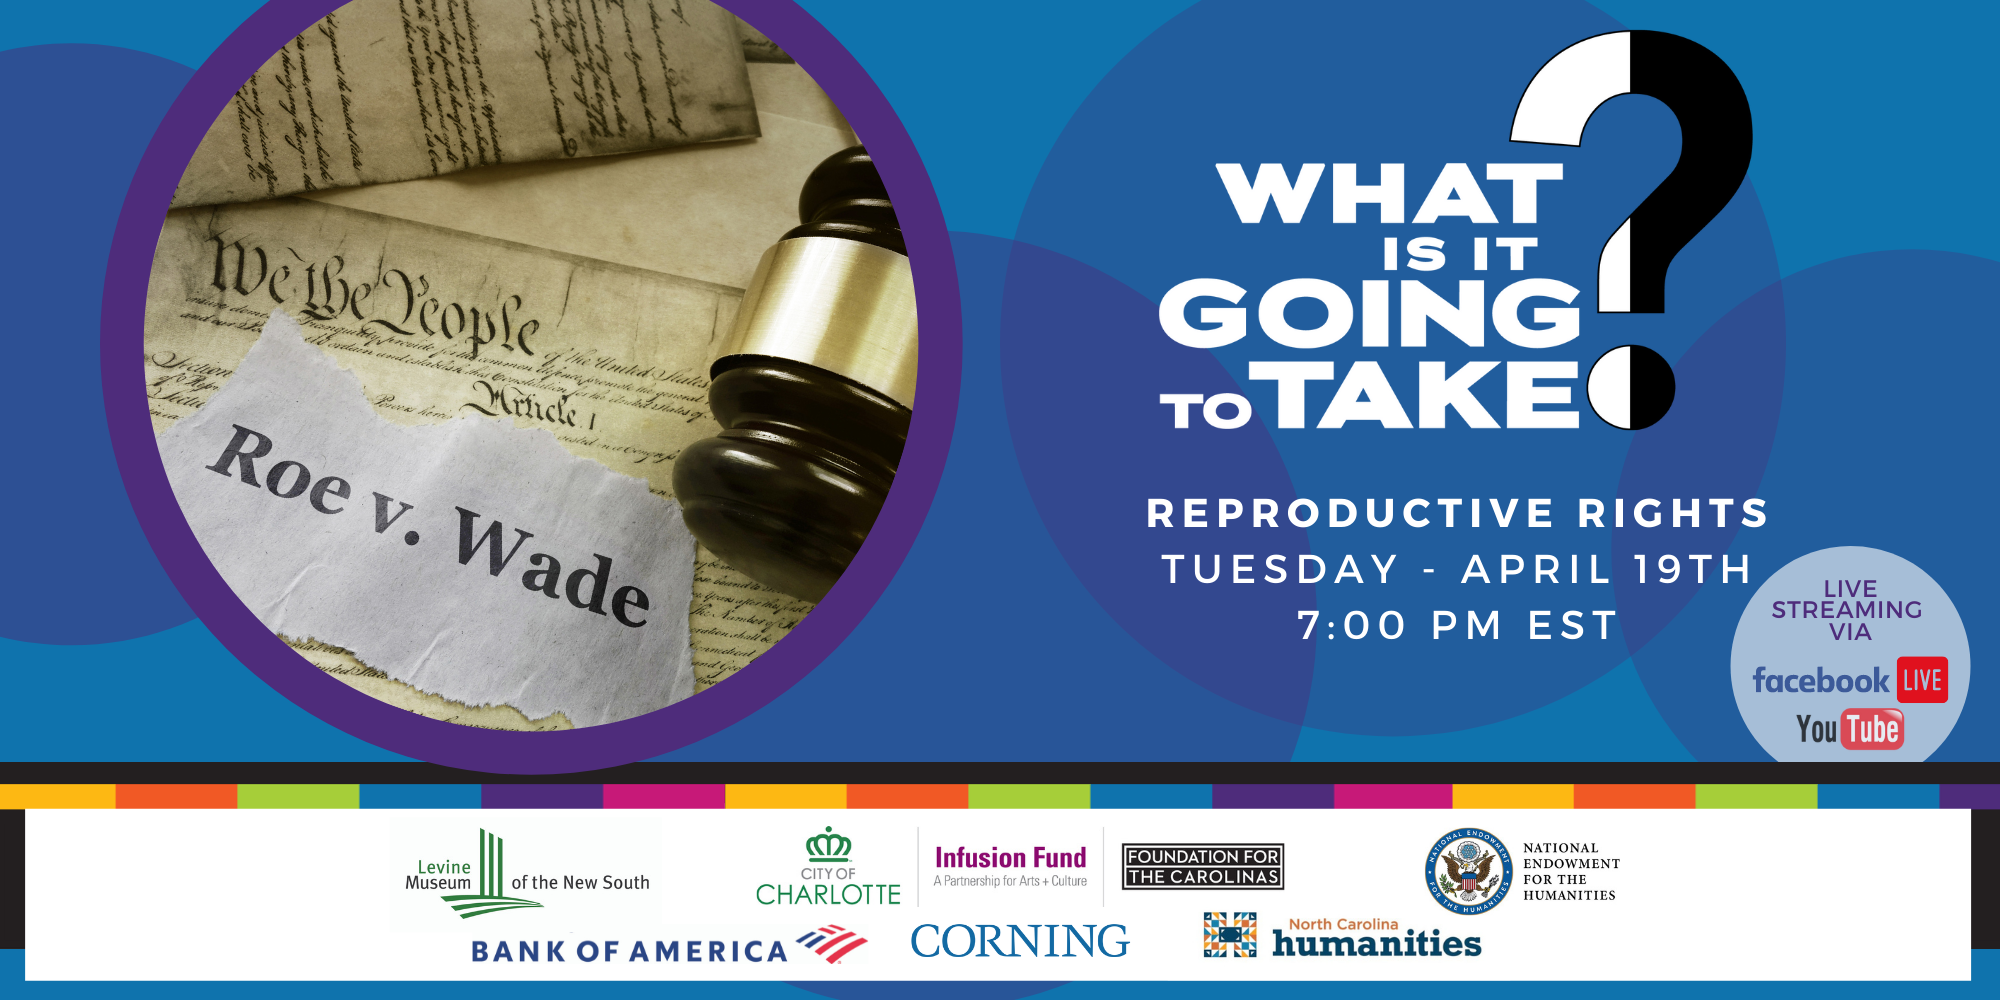 Levine Museum of the New South What Is It Going To Take? Reproductive Rights Event Image